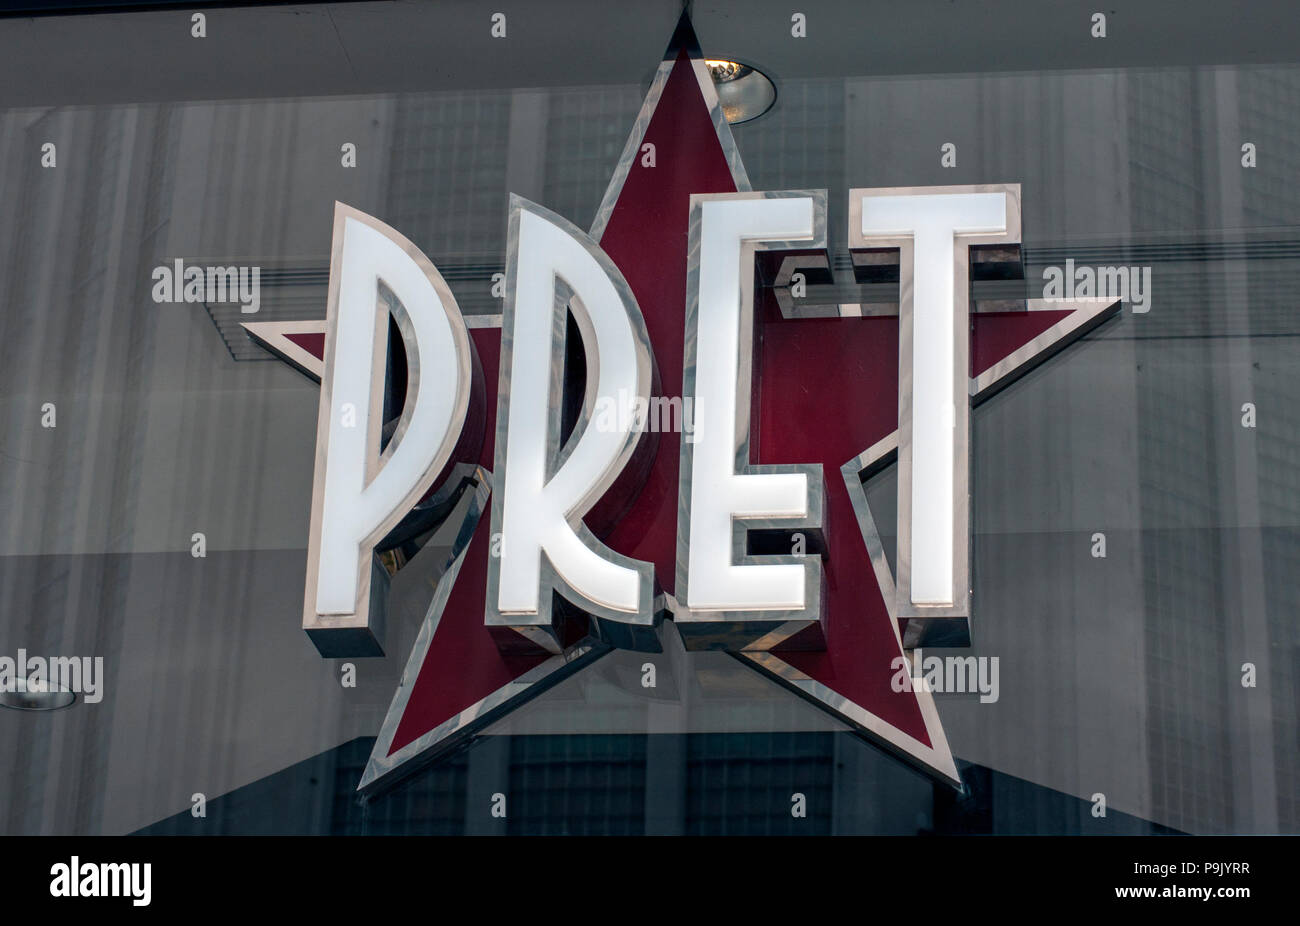 Pret Sign, Manchester Stock Photo